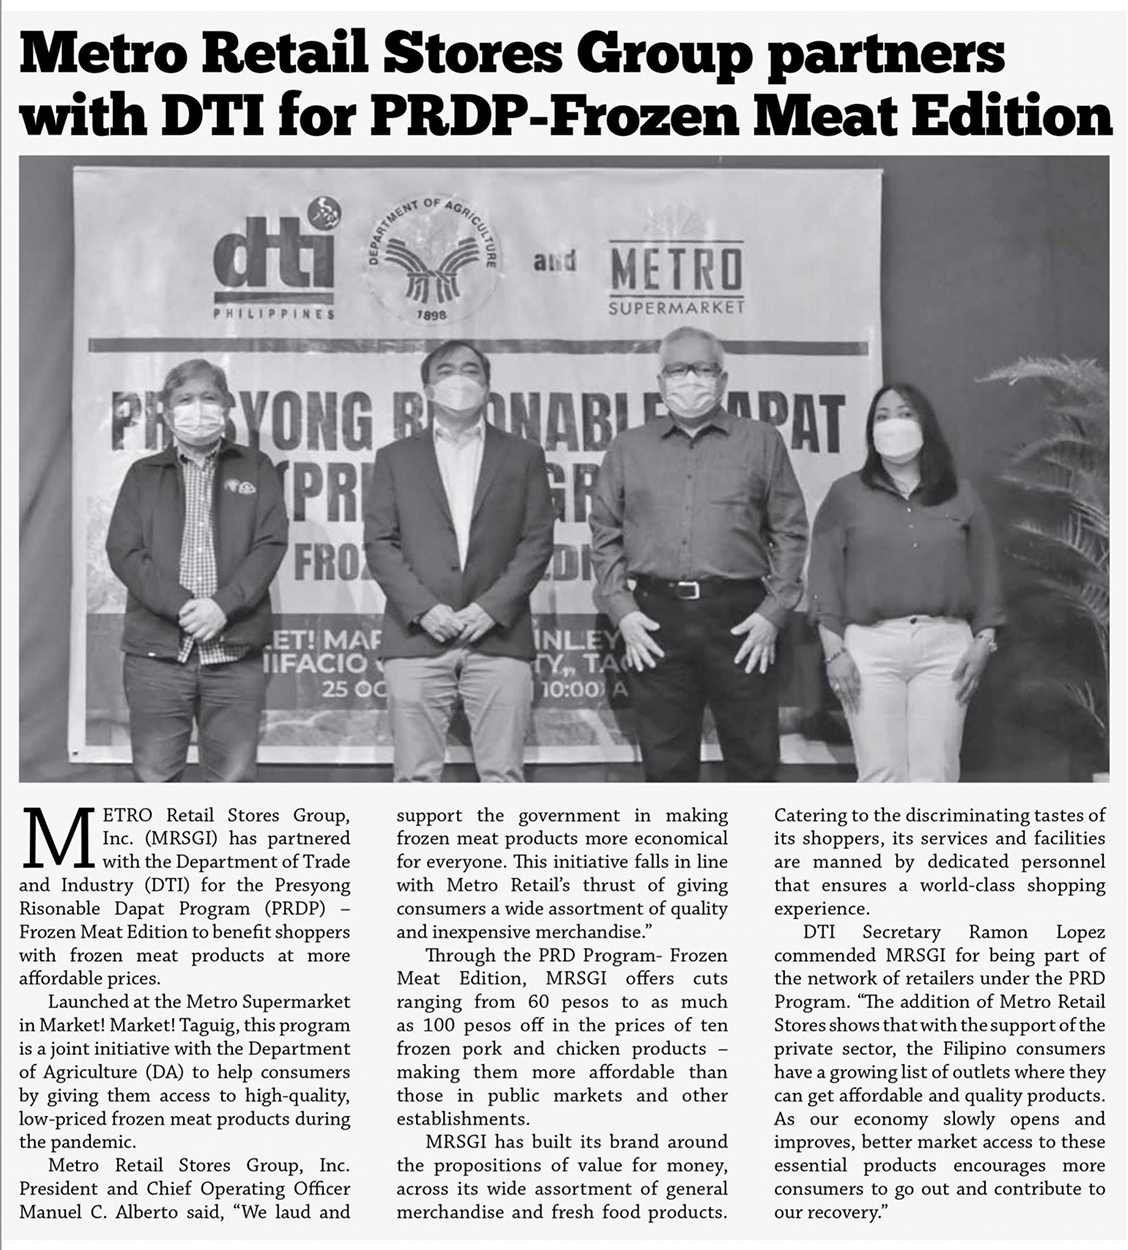 Nov 3 Metro Retail Stores Group partners with DTI for the PRDP Frozen Meat Edition Business Mirror